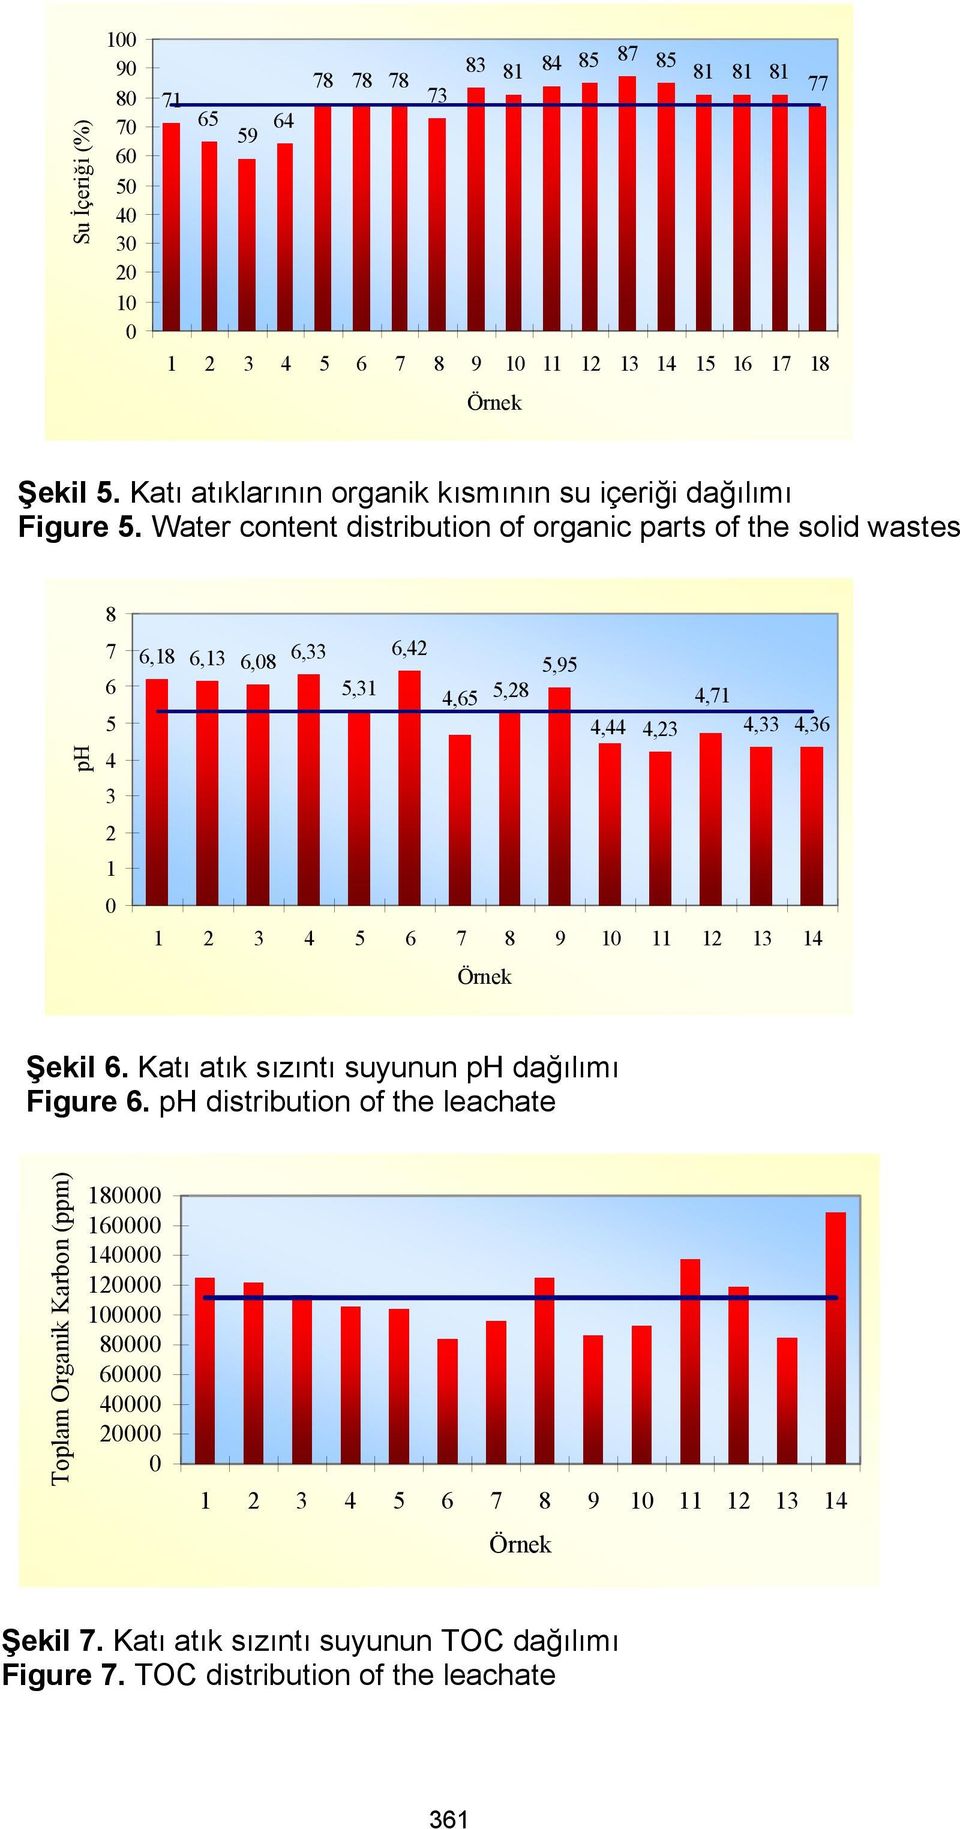 Water content distribution of organic parts of the solid wastes ph 8 7 6 5 4 3 2 1 6,18 6,13 6,8 6,33 5,31 6,42 4,65 5,28 5,95 4,44 4,71 4,23 4,33 4,36 1 2 3 4 5 6